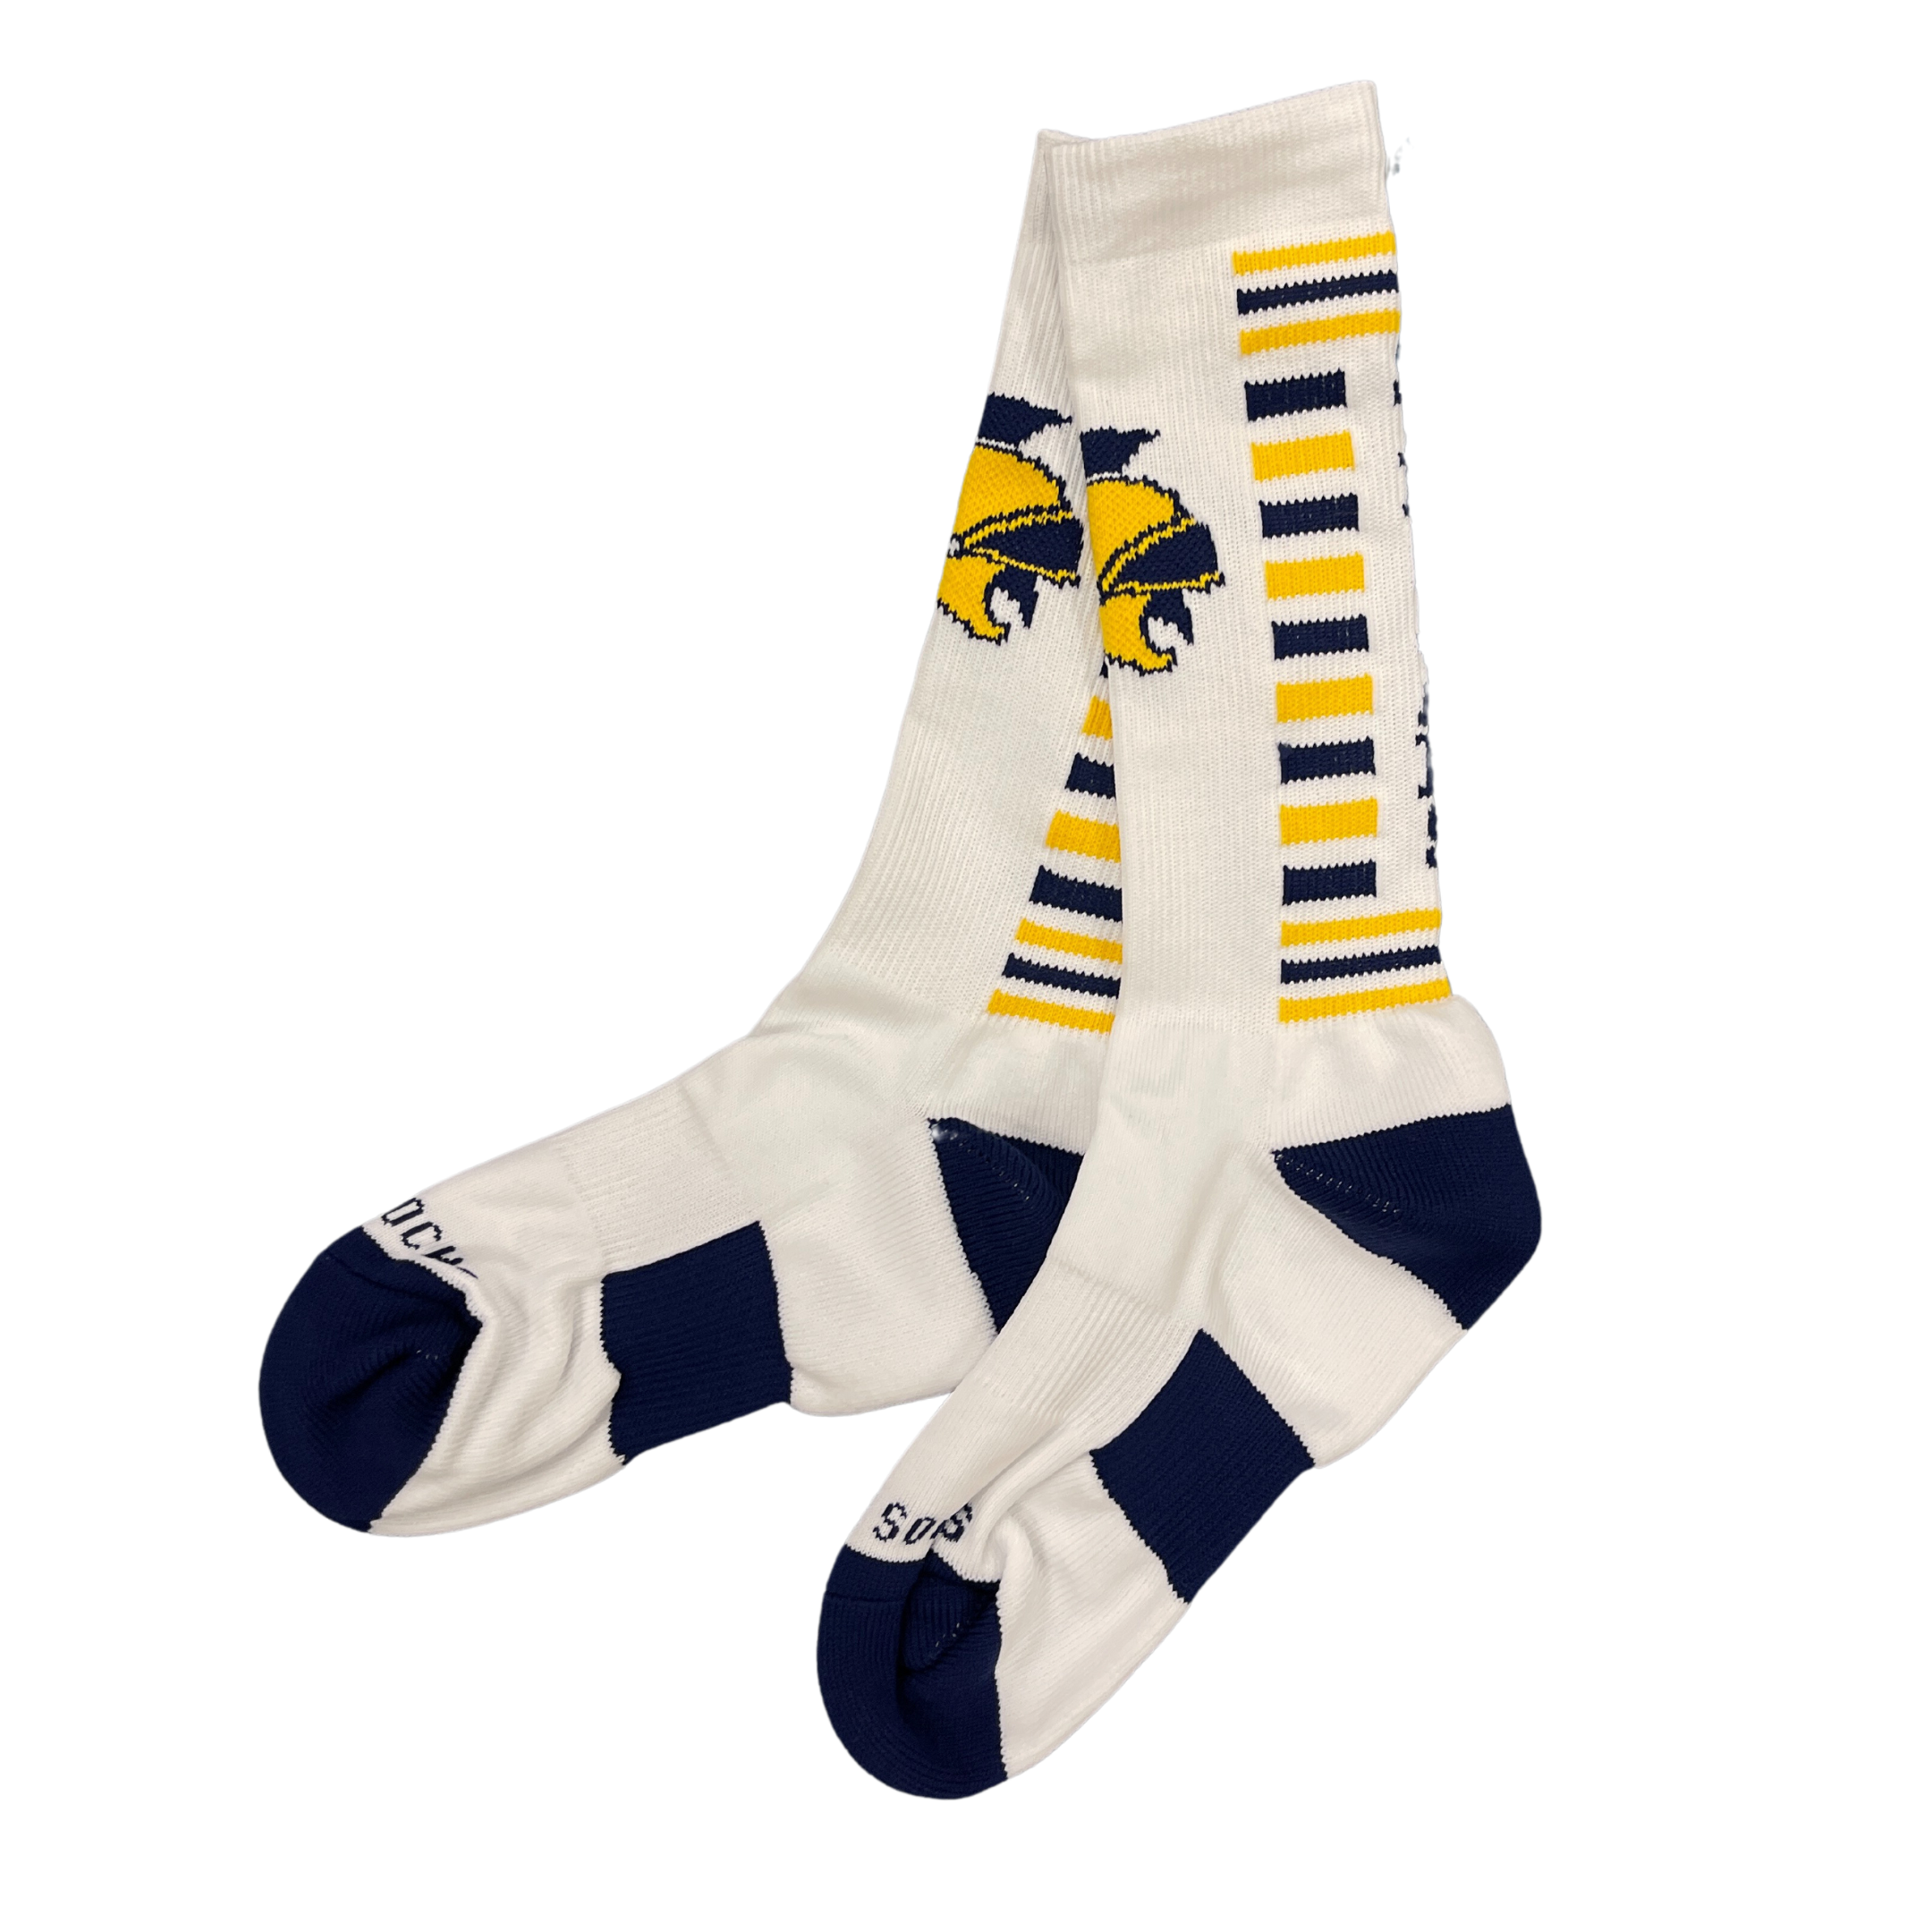 NEW Embroidered Performance Socks